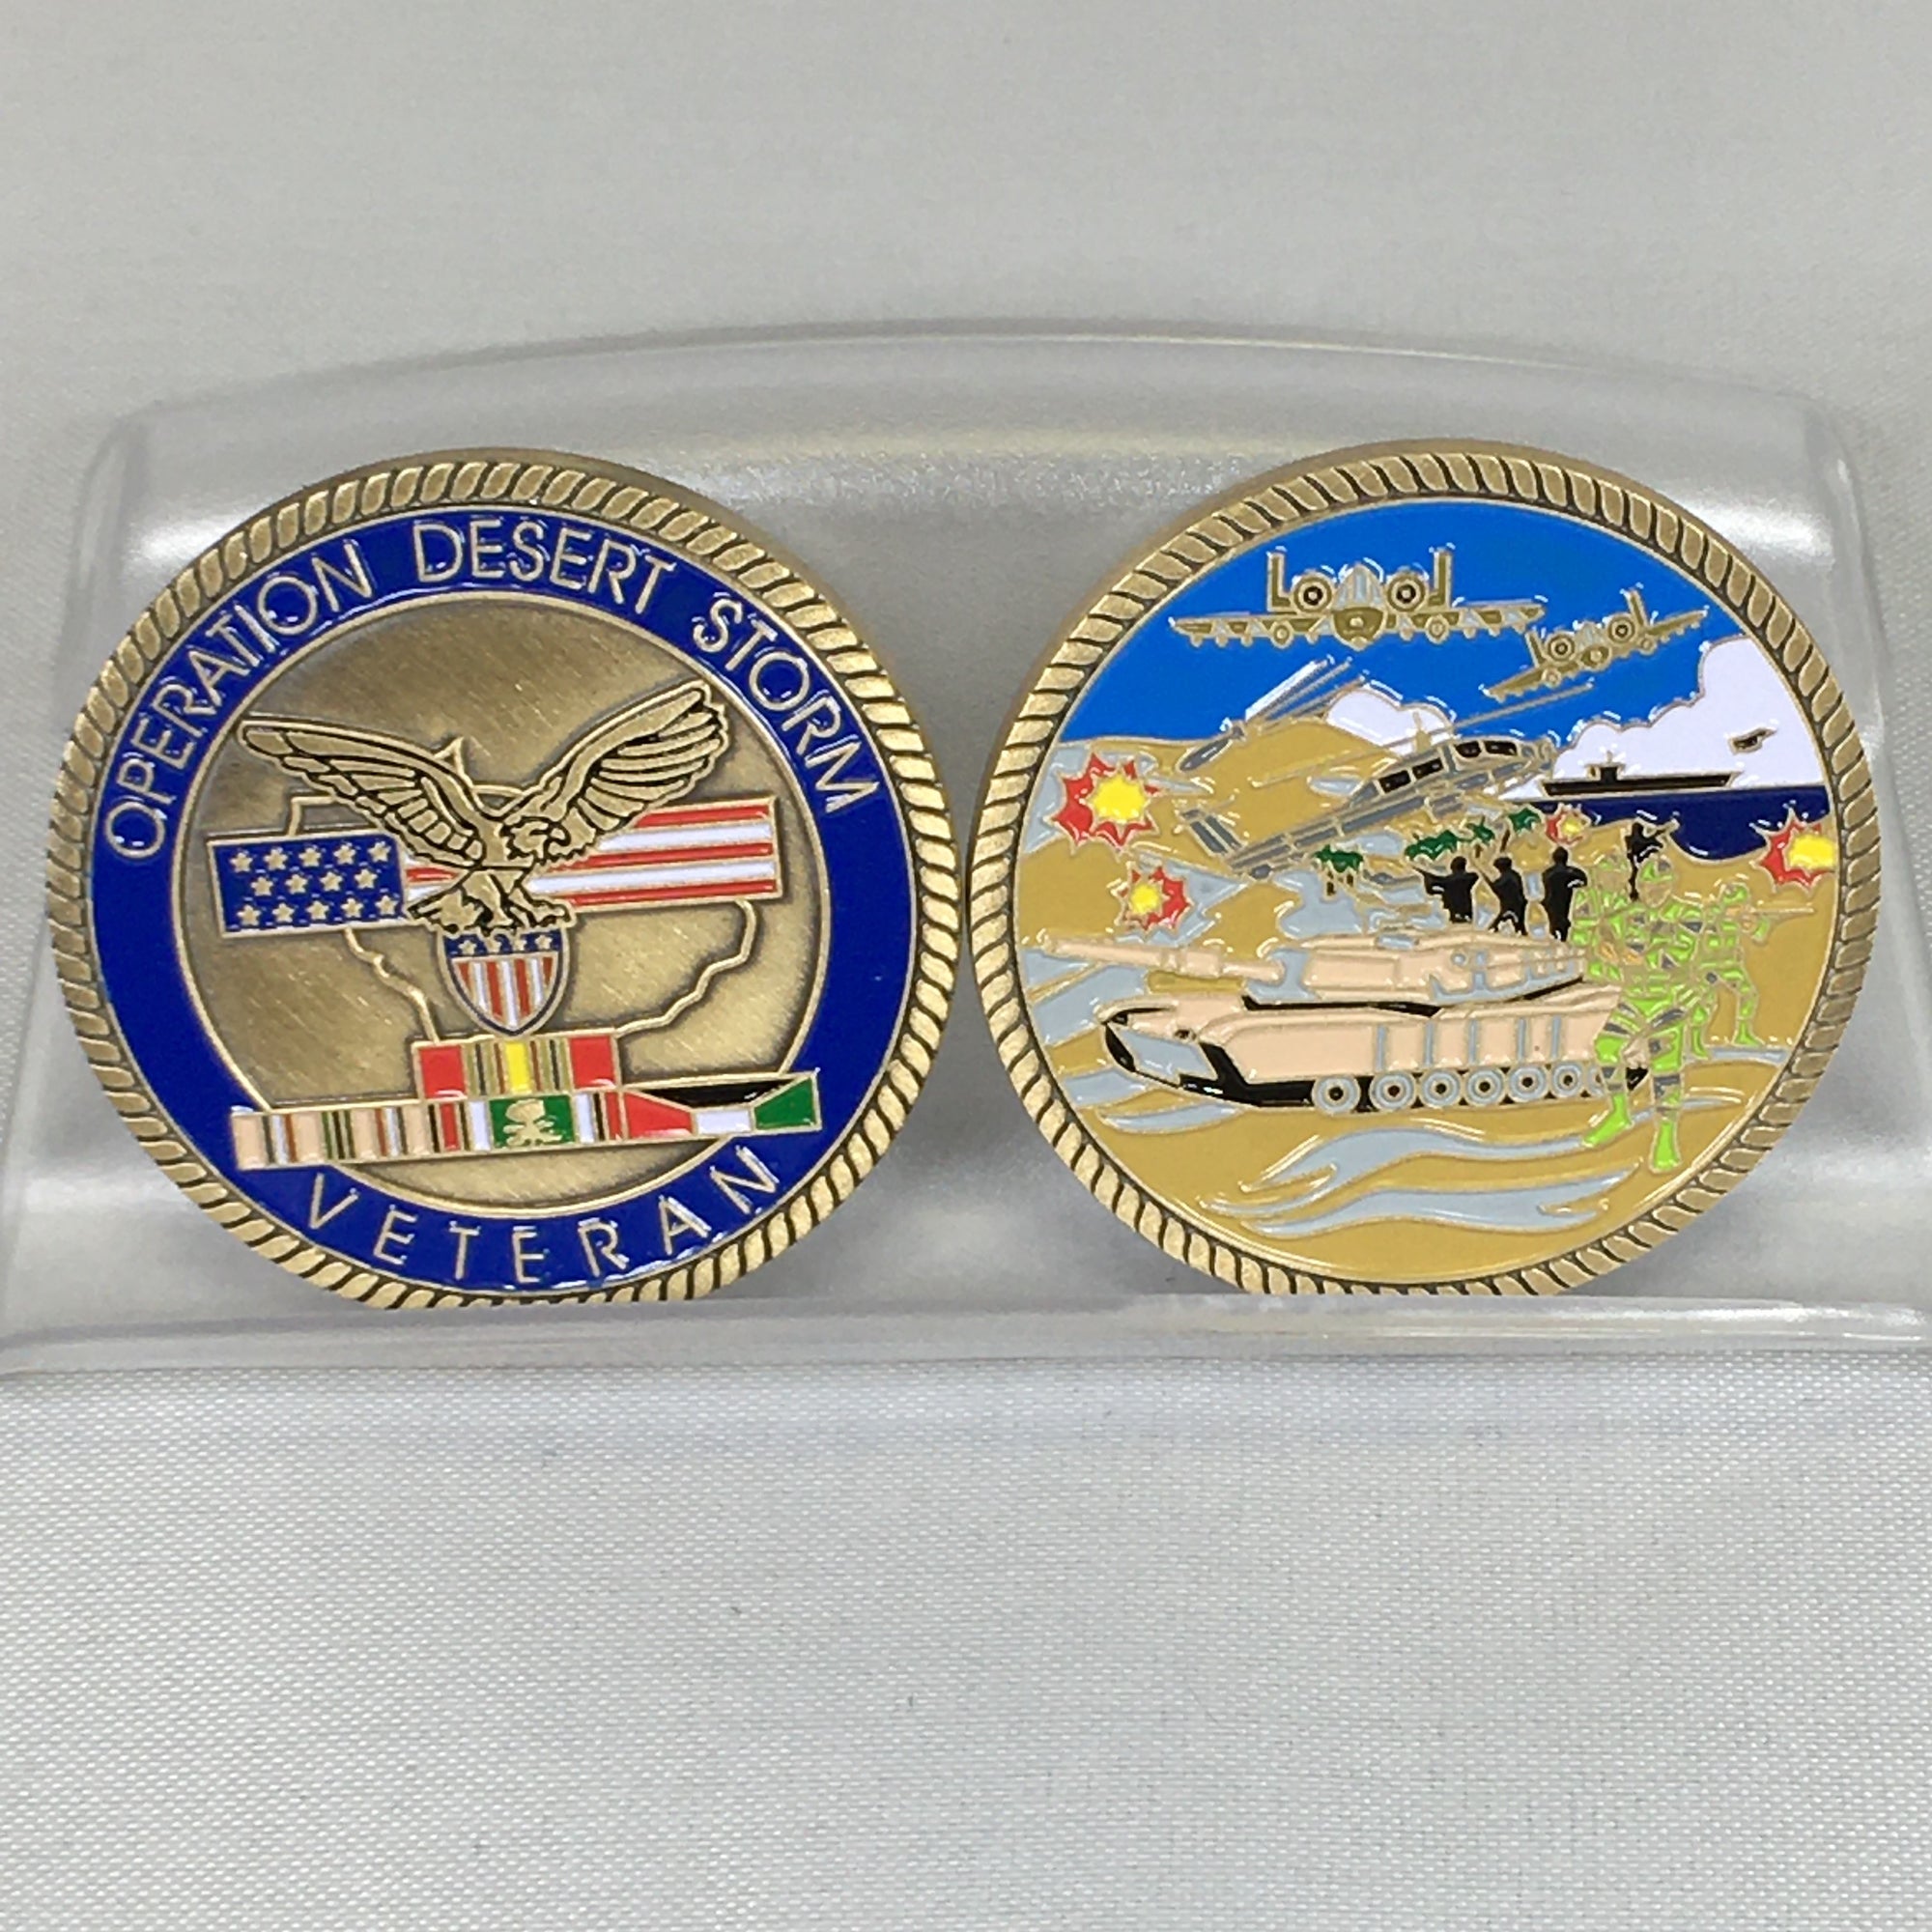 Operation Desert Storm Challenge Coin Hi Army Museum Society Store